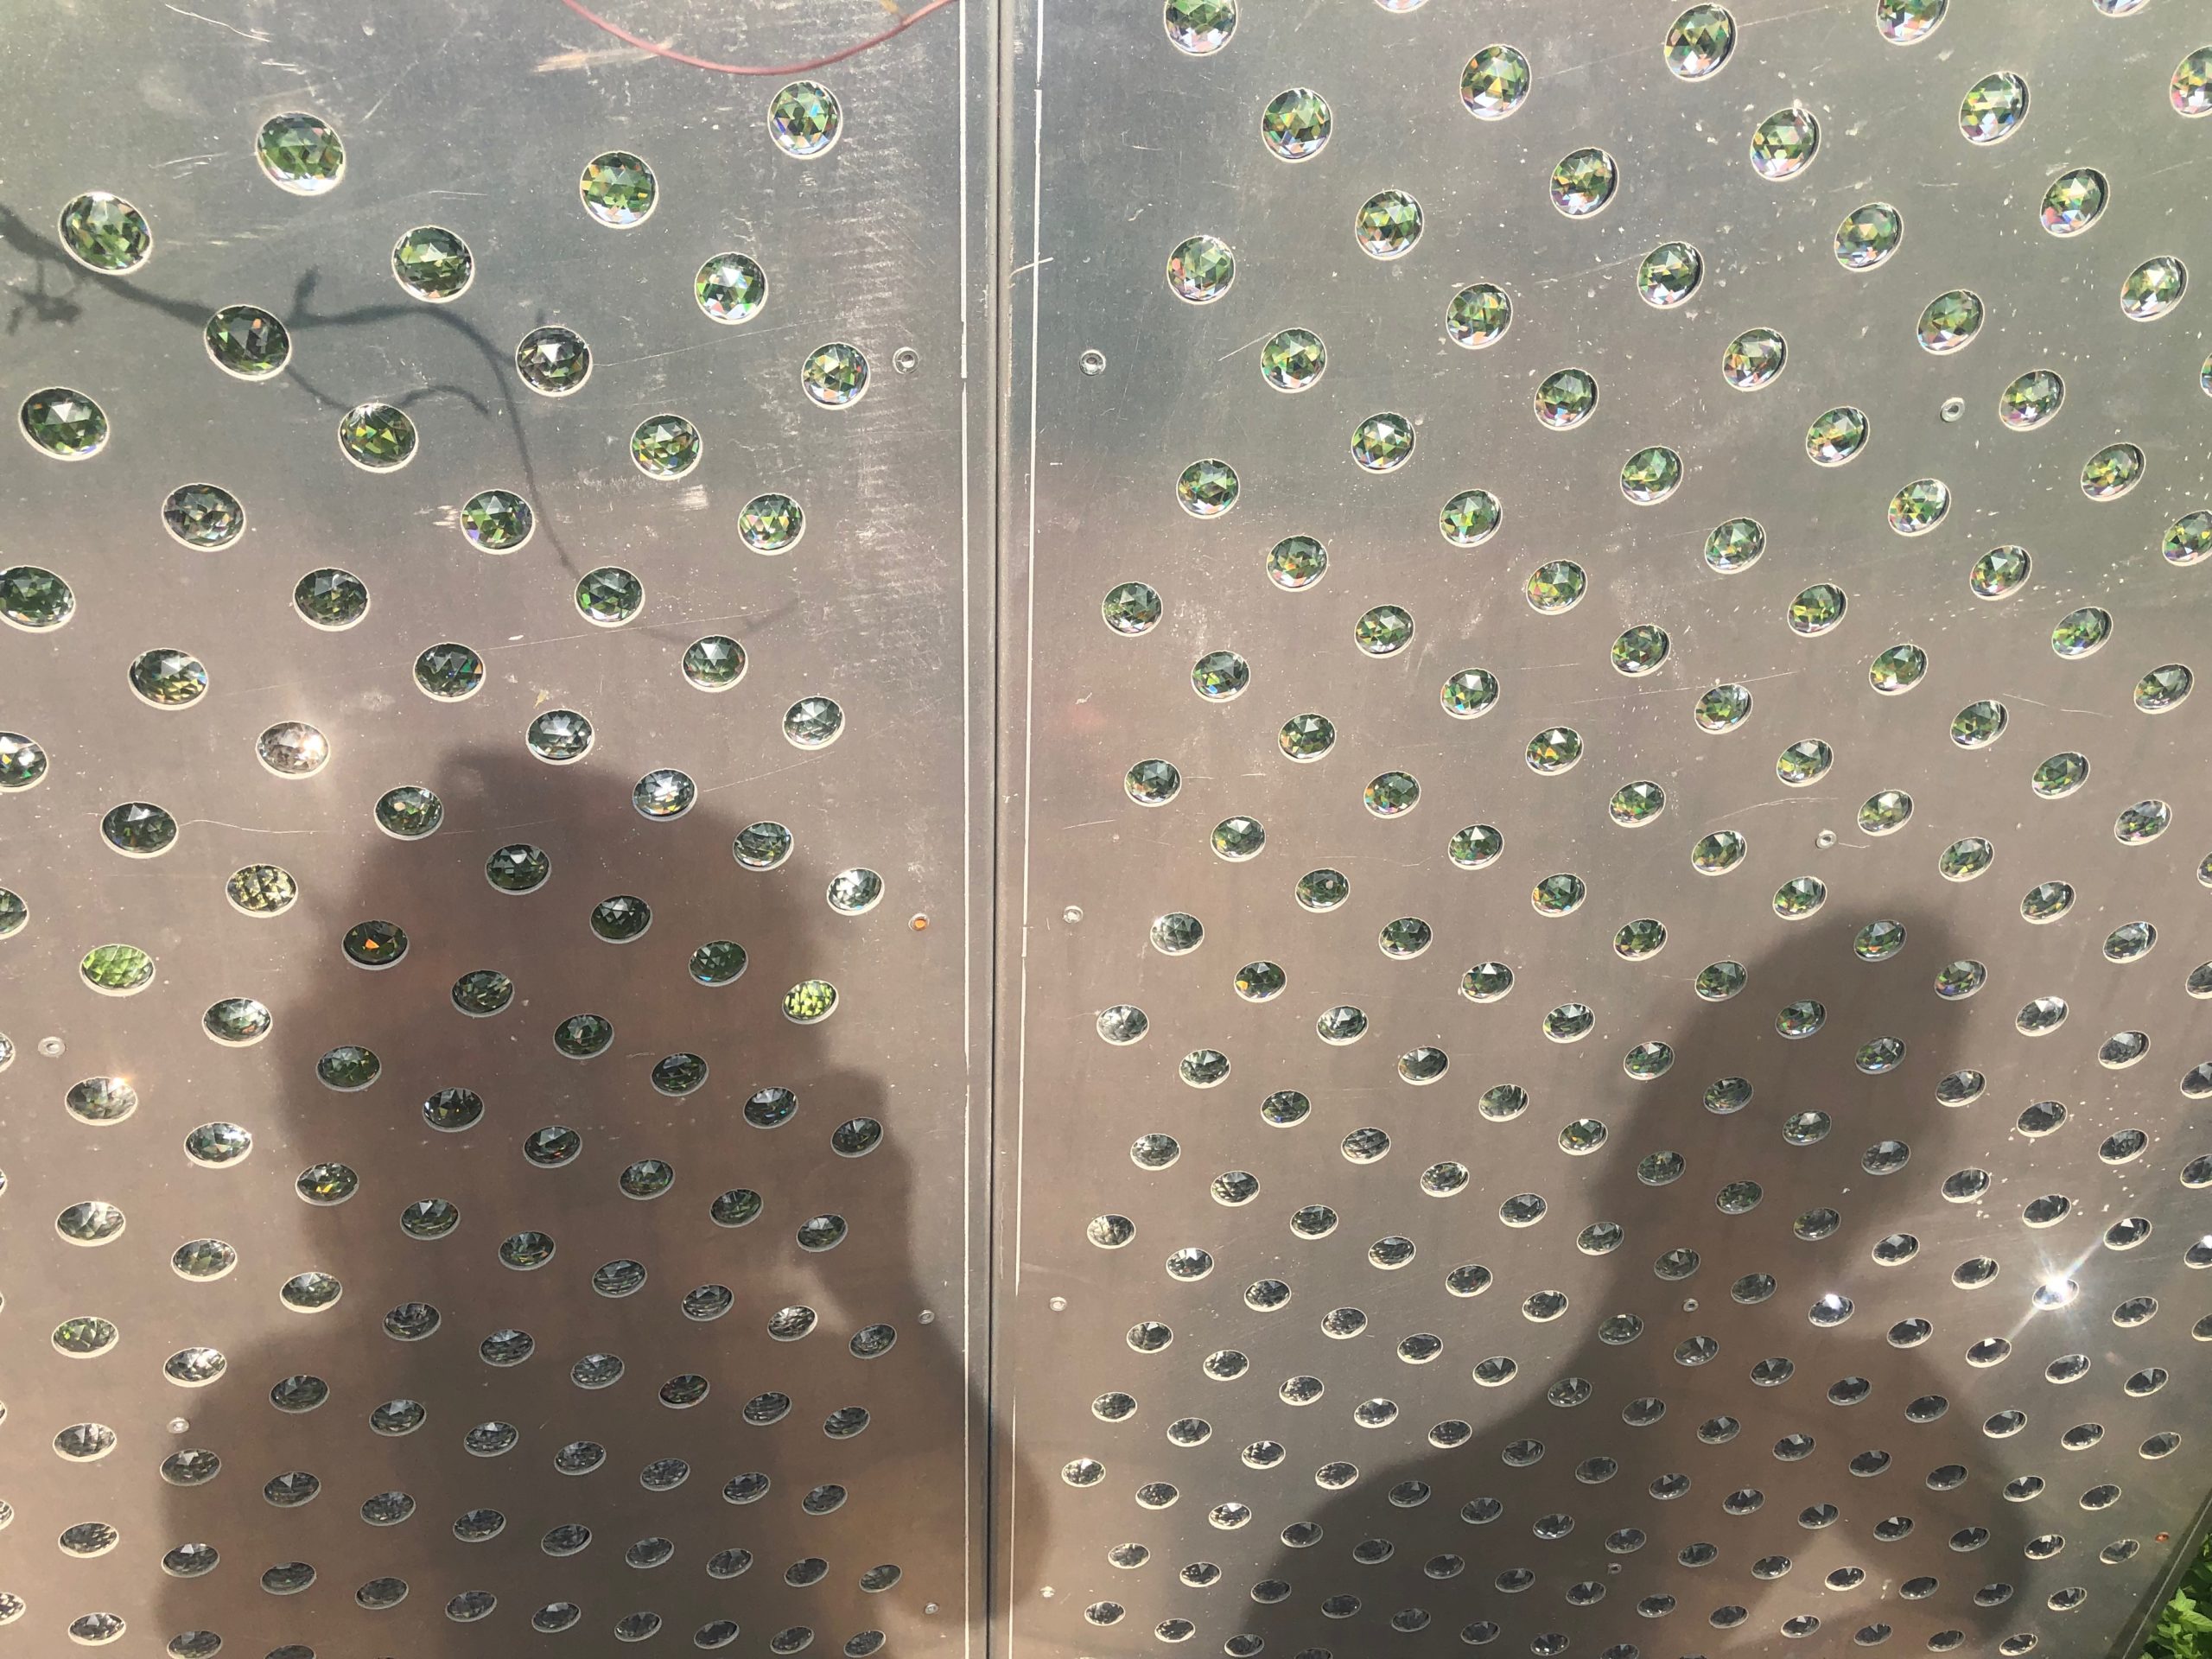 a silver metal surface studded with faceted pieces of clear glass, and two people's shadows on it